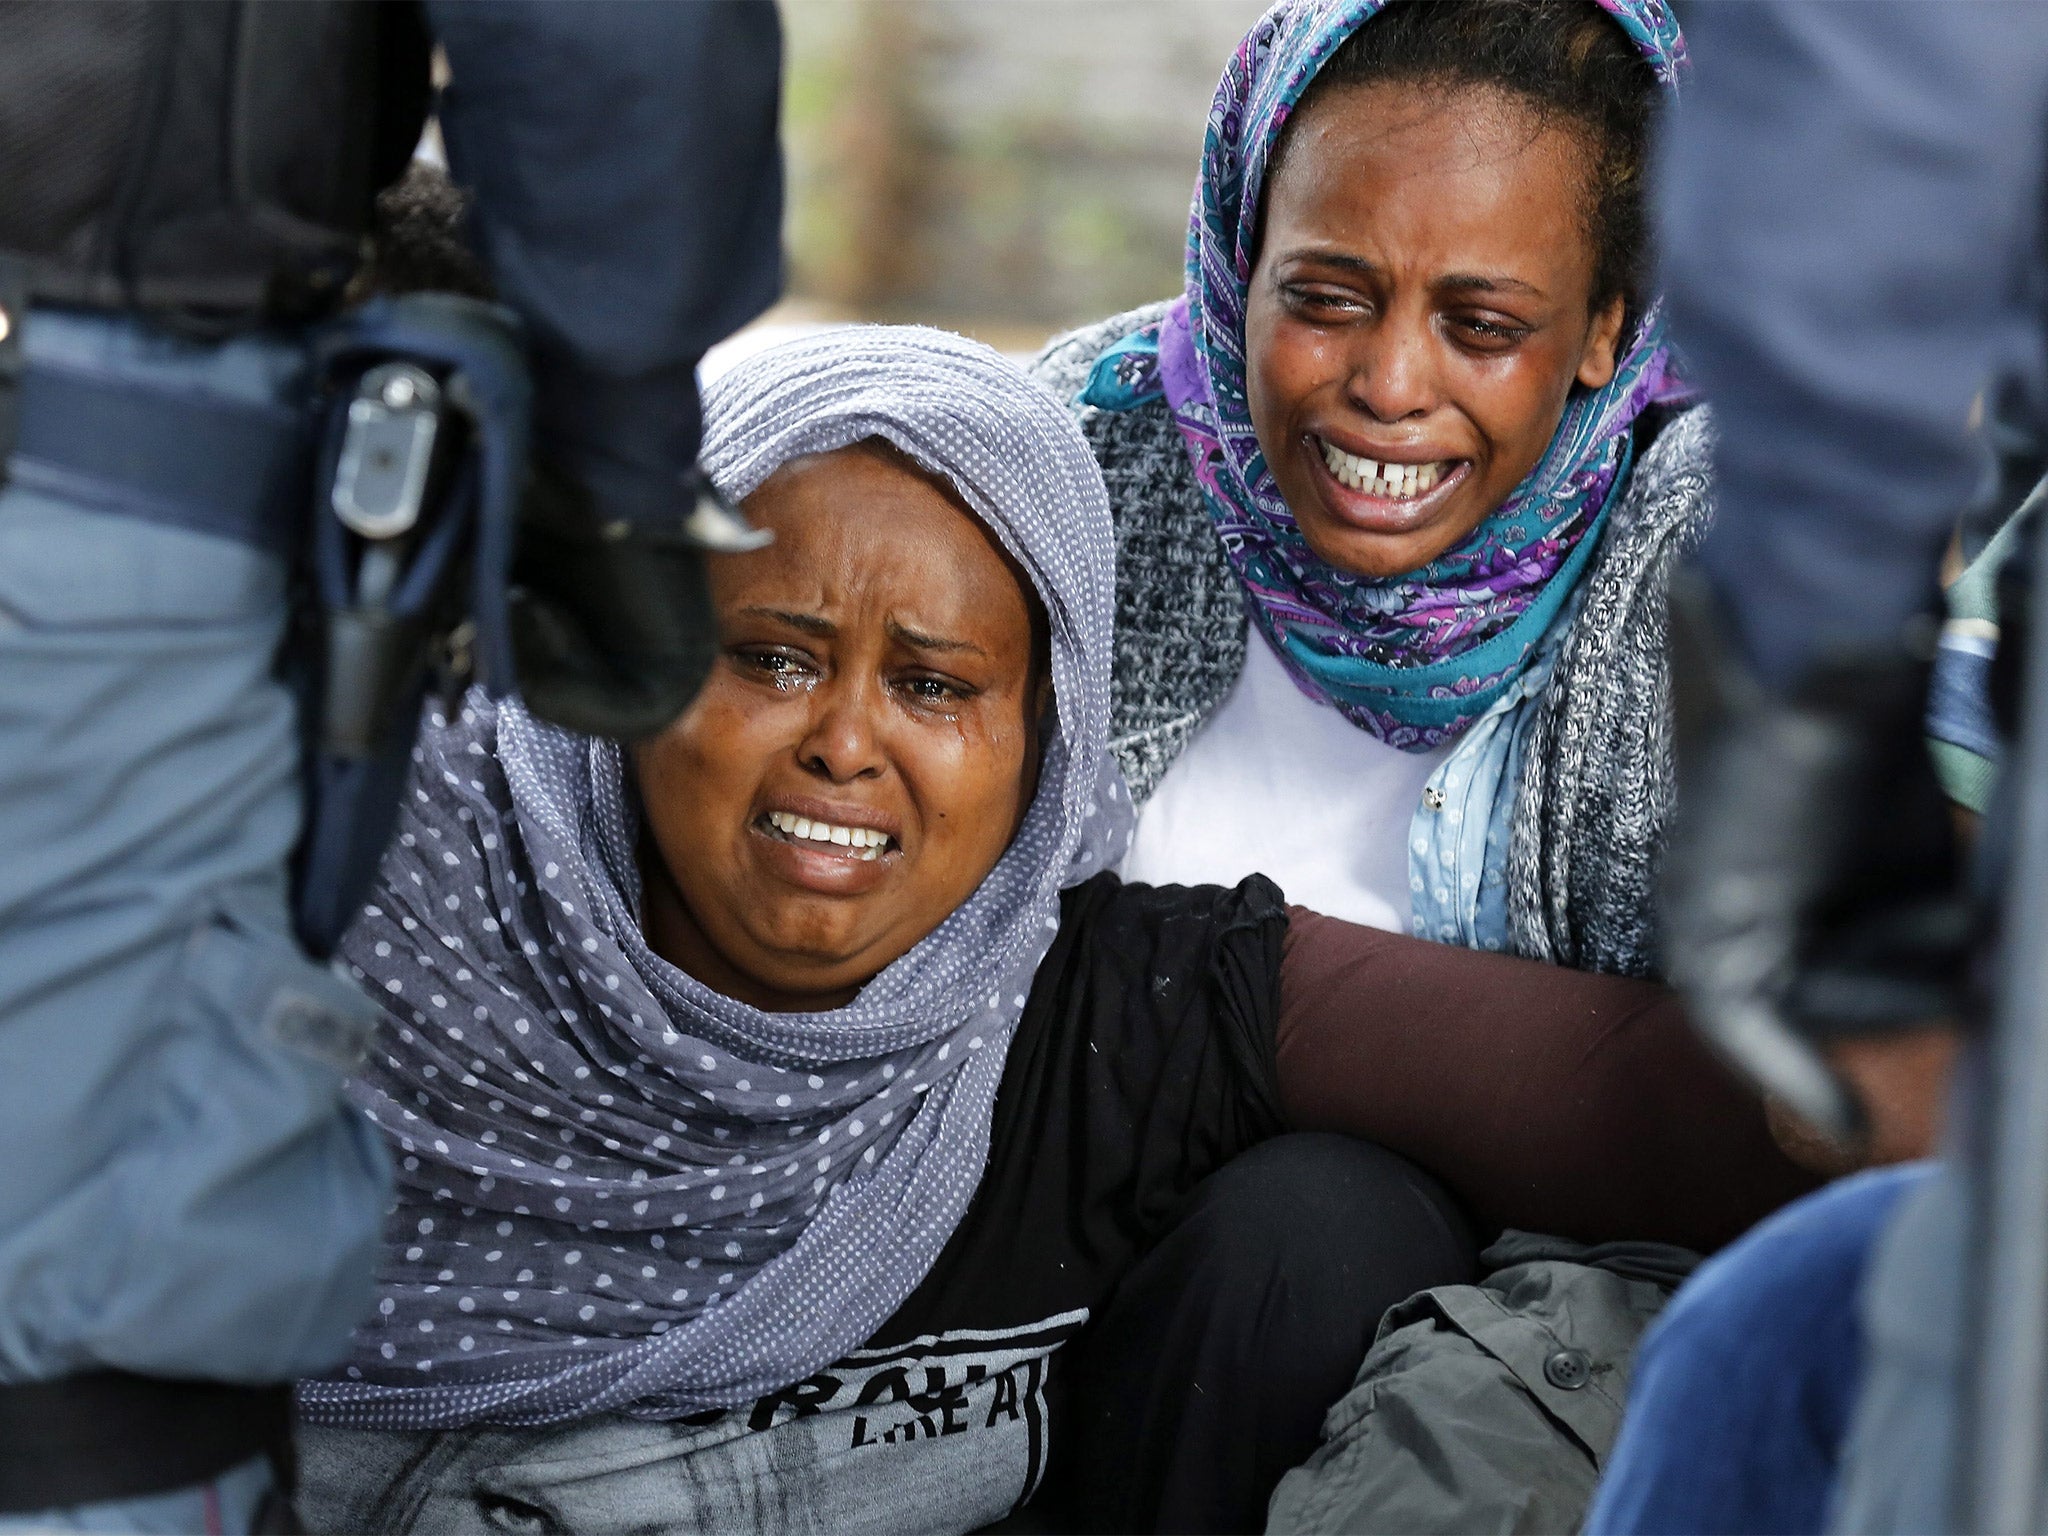 African migrants cry as Italian police stop them from crossing the border into France in Ventimiglia, Italy, on Tuesday. More than 150 people have reportedly been blocked from crossing